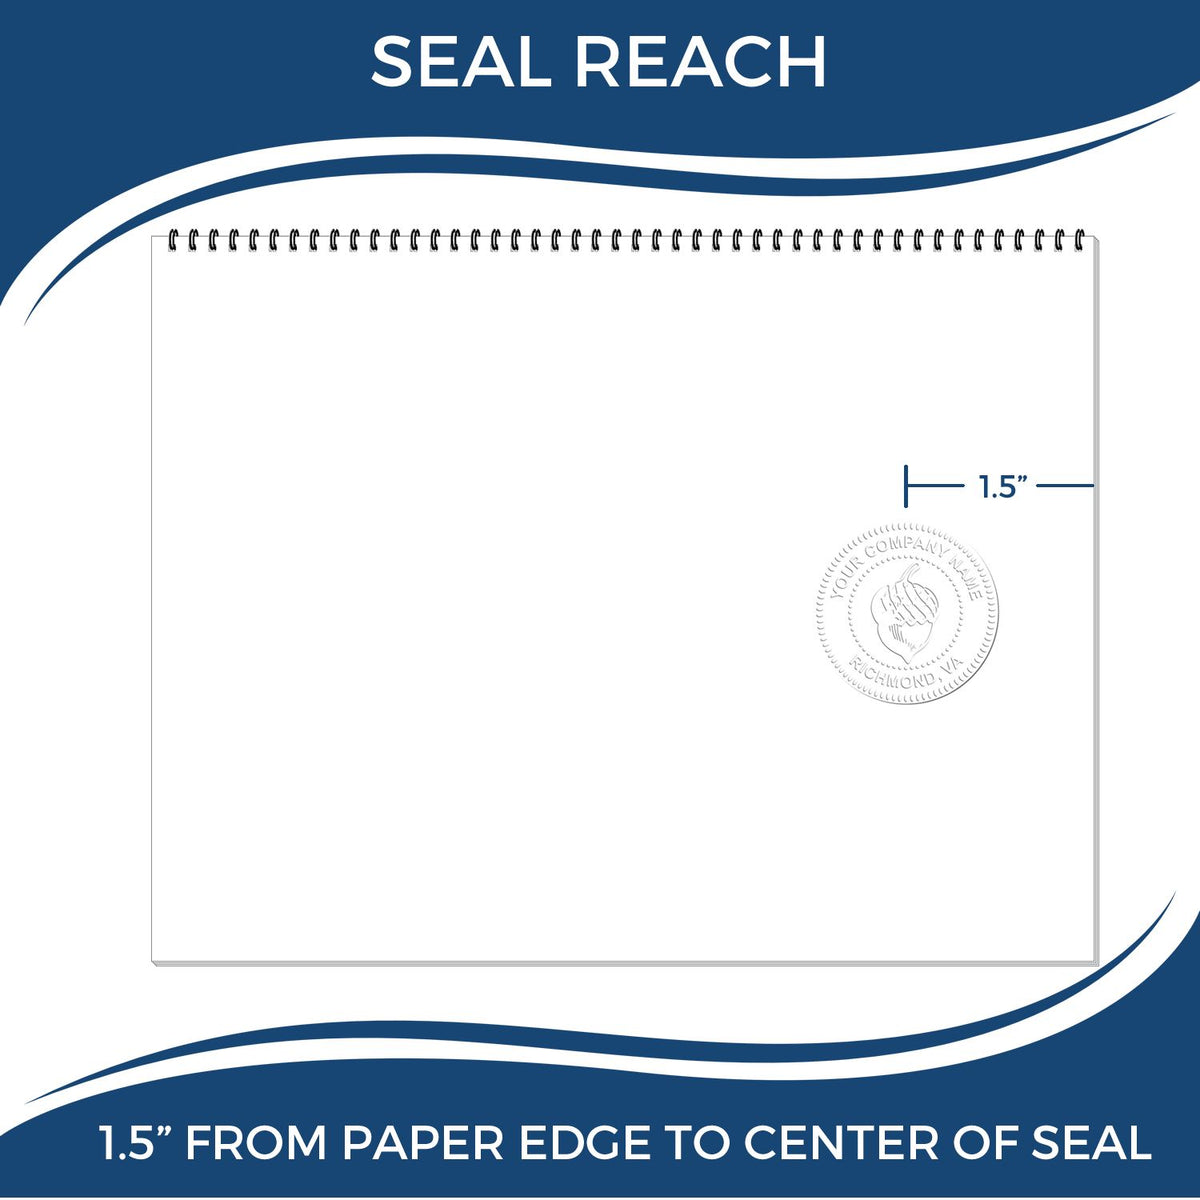 An infographic showing the seal reach which is represented by a ruler and a miniature seal image of the District of Columbia Soft Land Surveyor Embossing Seal